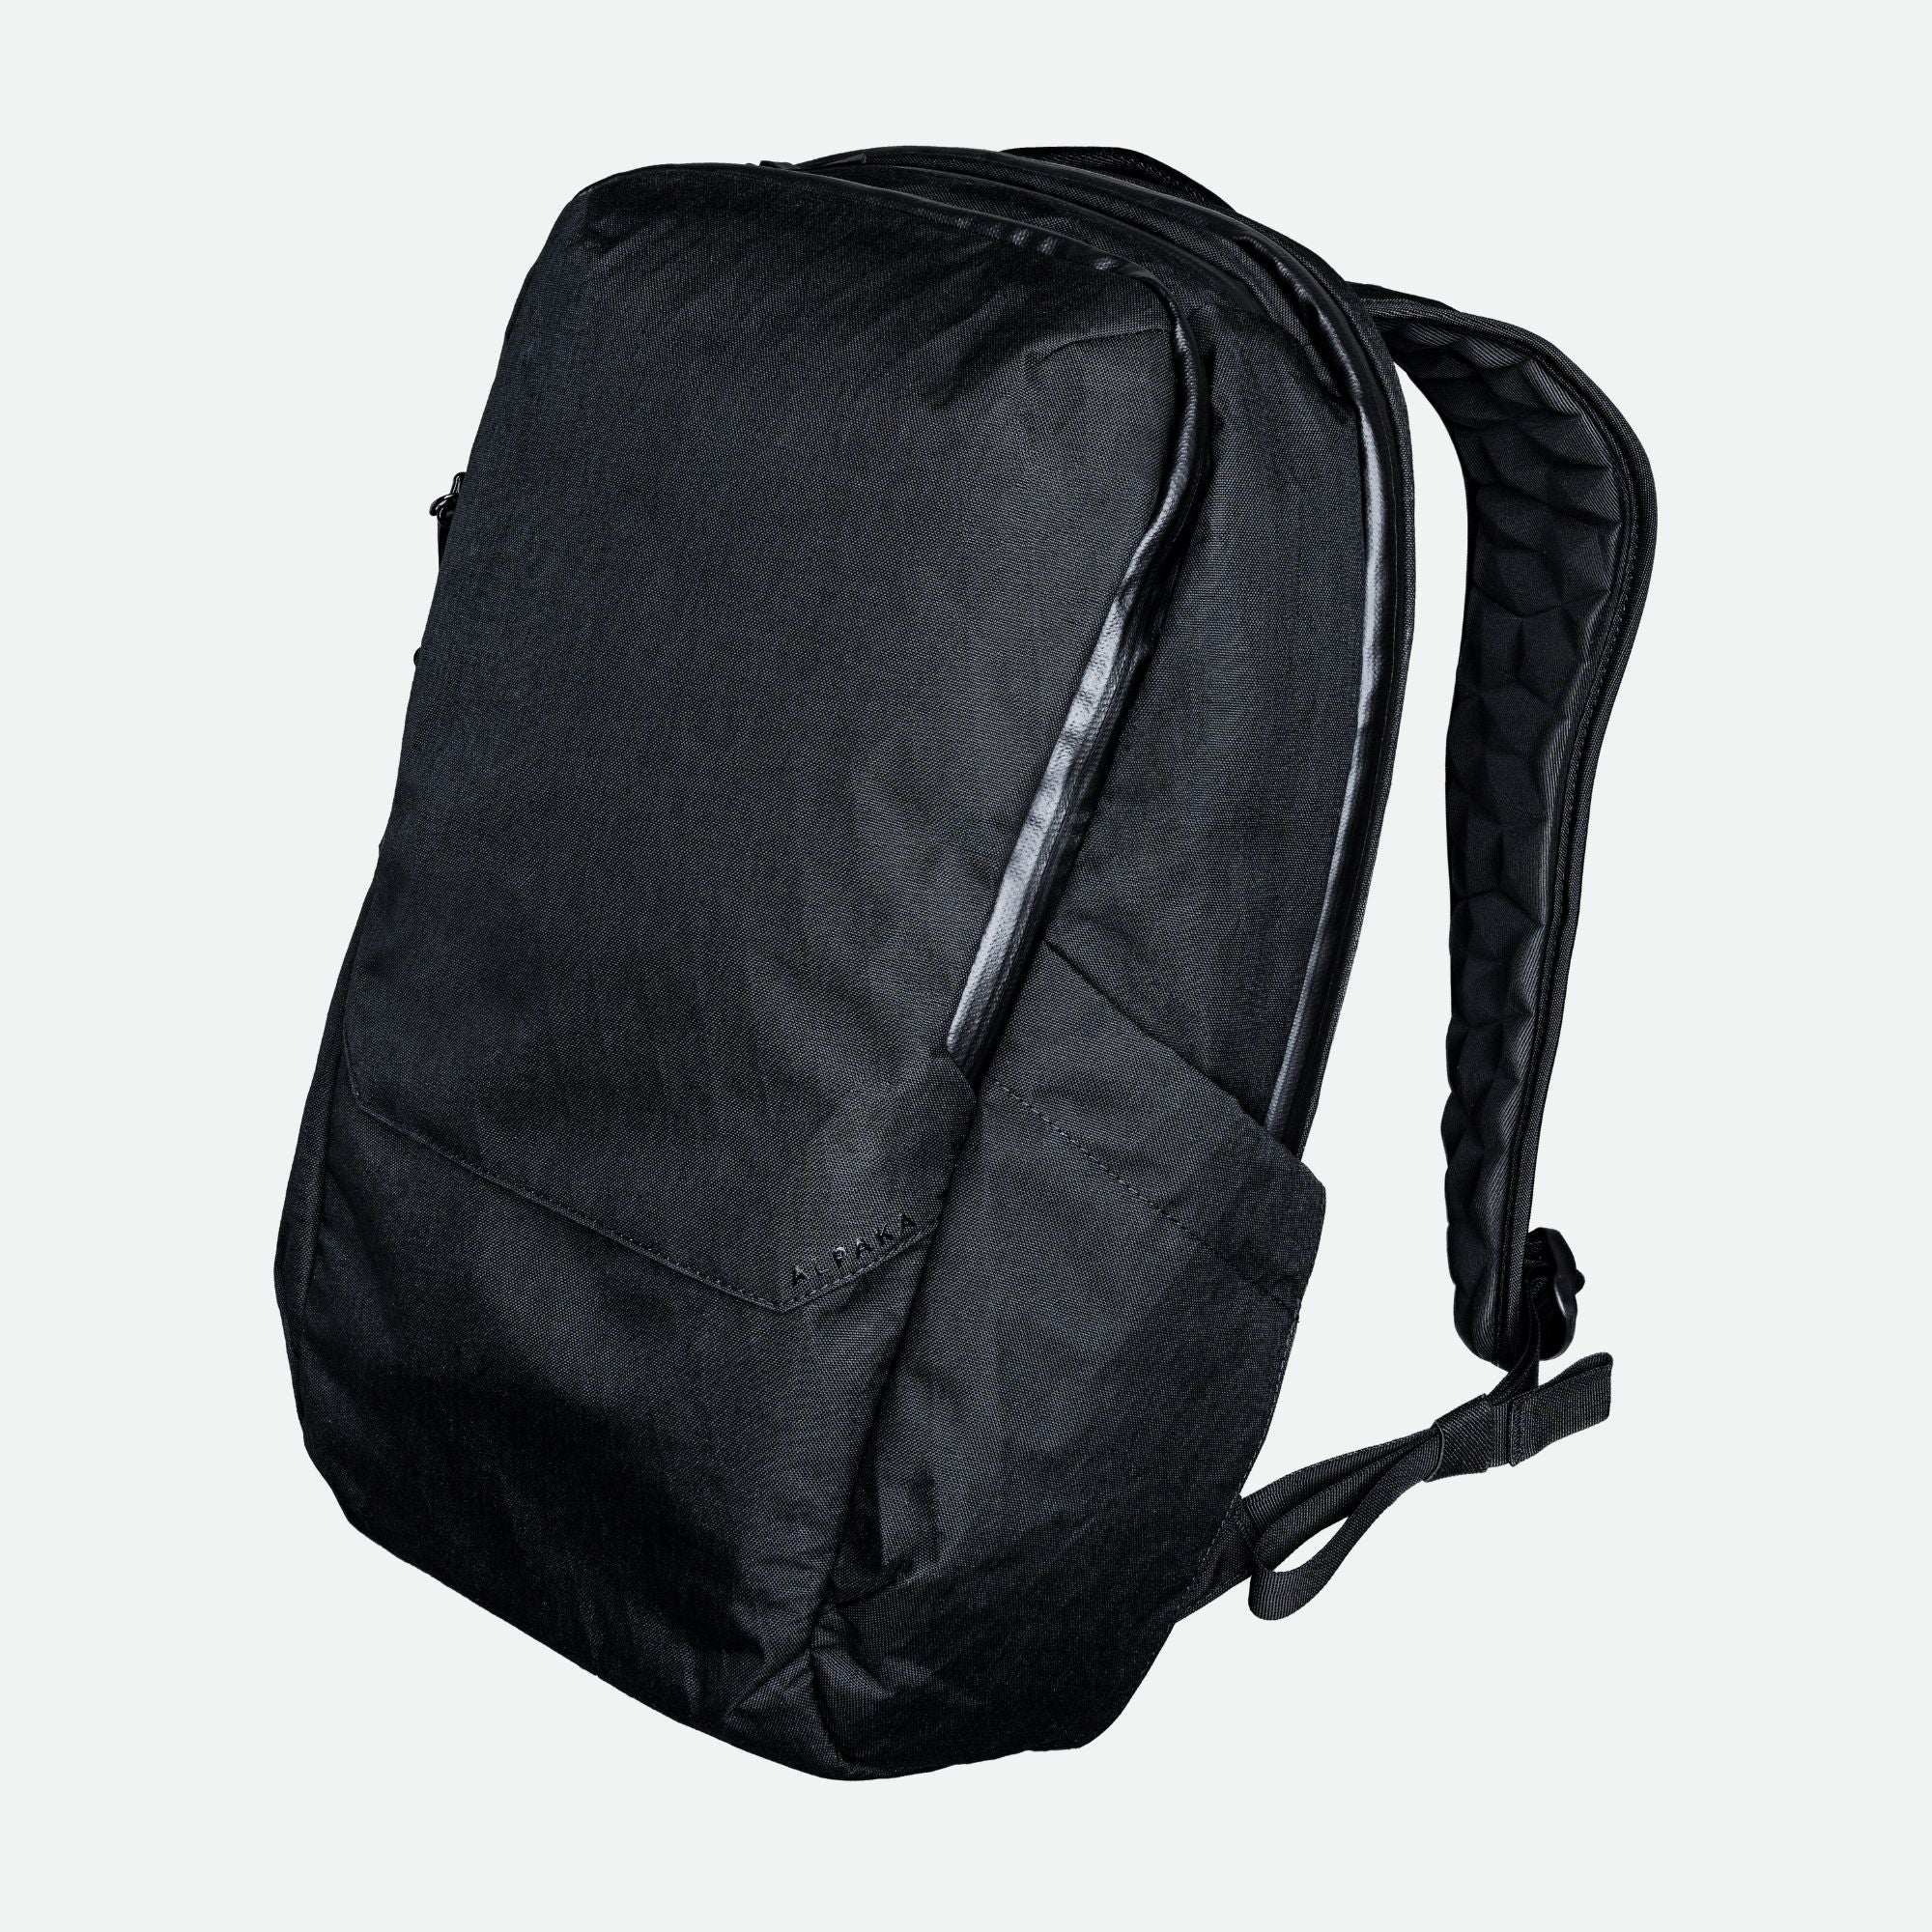 Elements Backpack Pro X50 Black cover photo